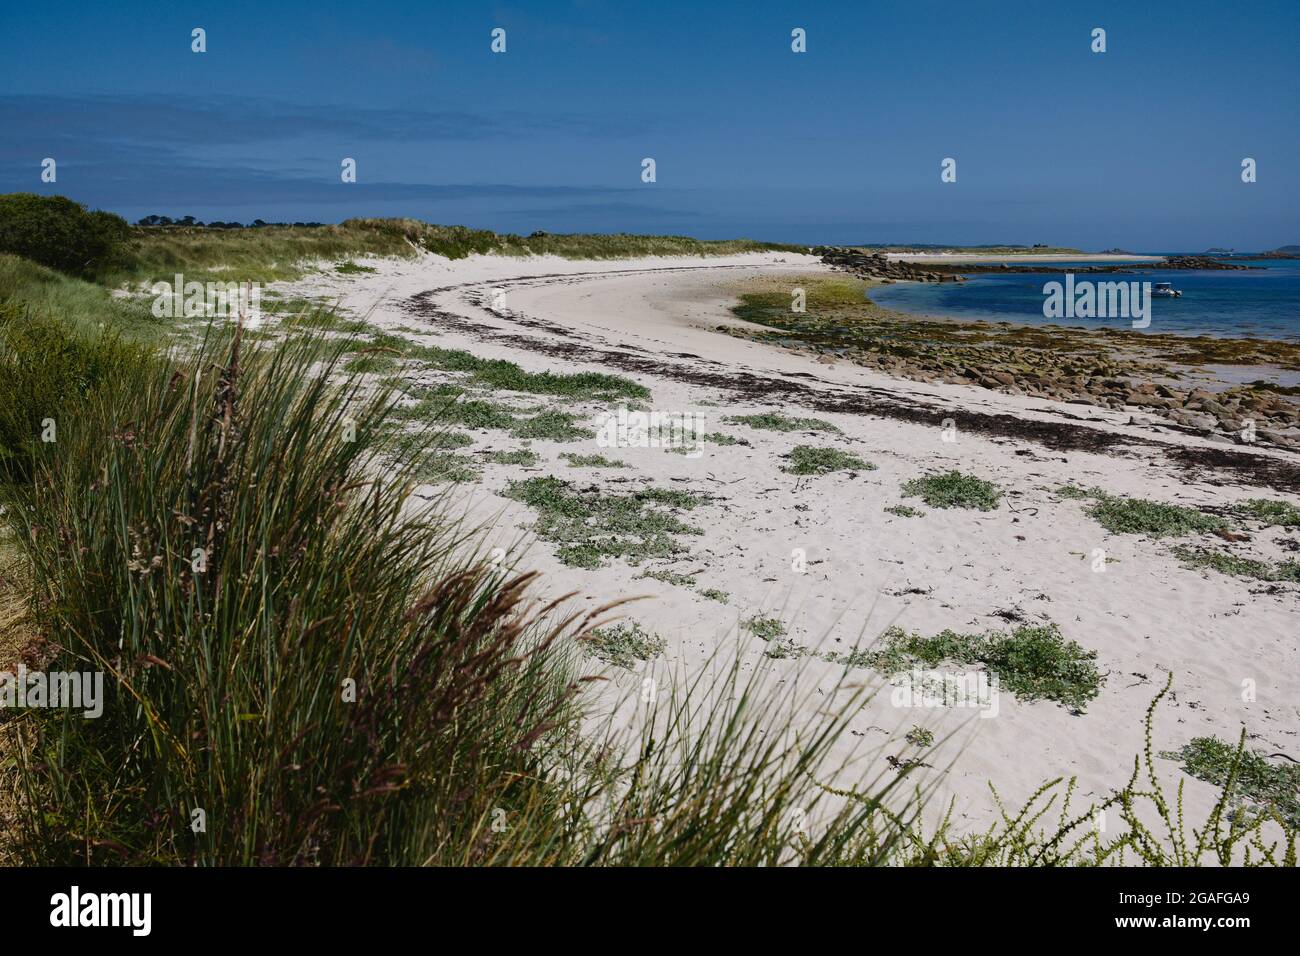 Sandy beach on the west side of Tresco island, Isles of Scilly, Cornwall, England, UK, July 2021 Stock Photo